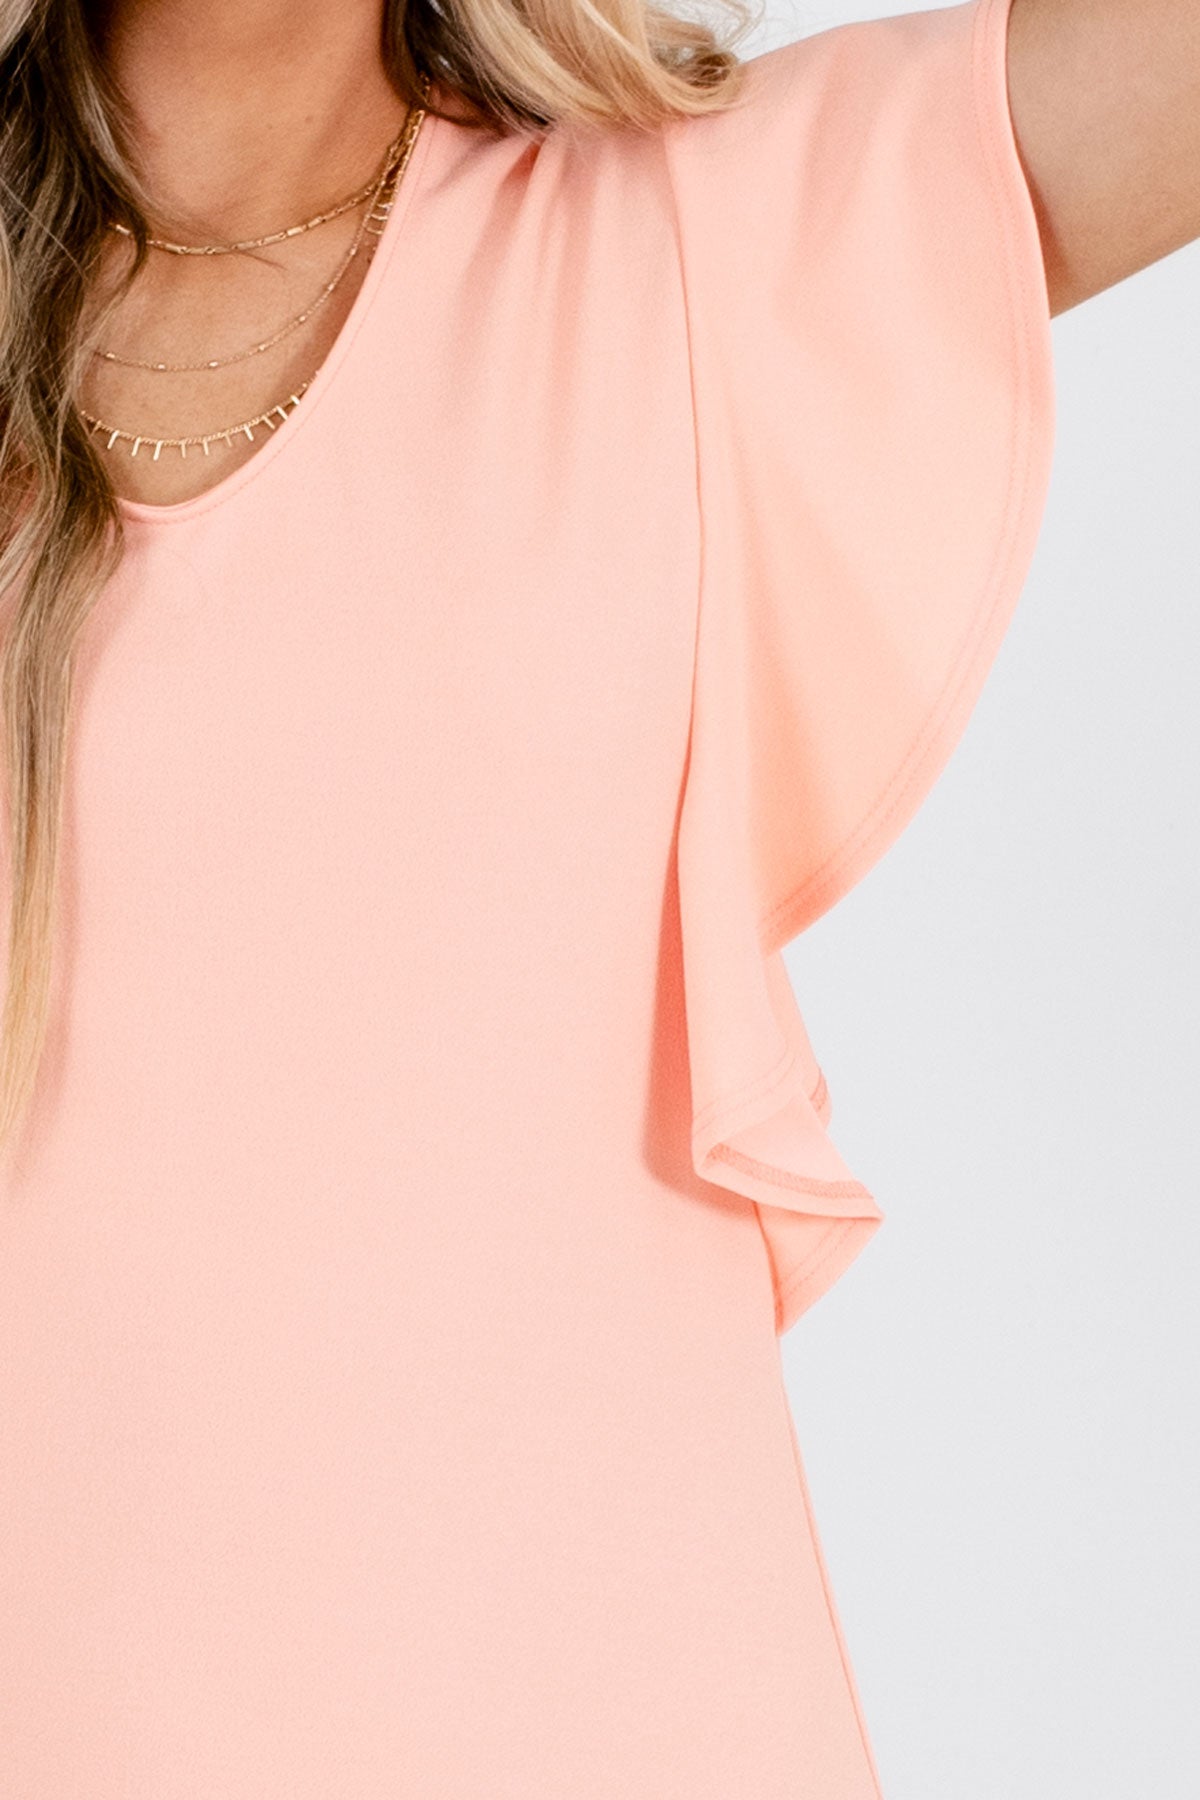 Peach Pink Affordable Online Boutique Clothing for Women